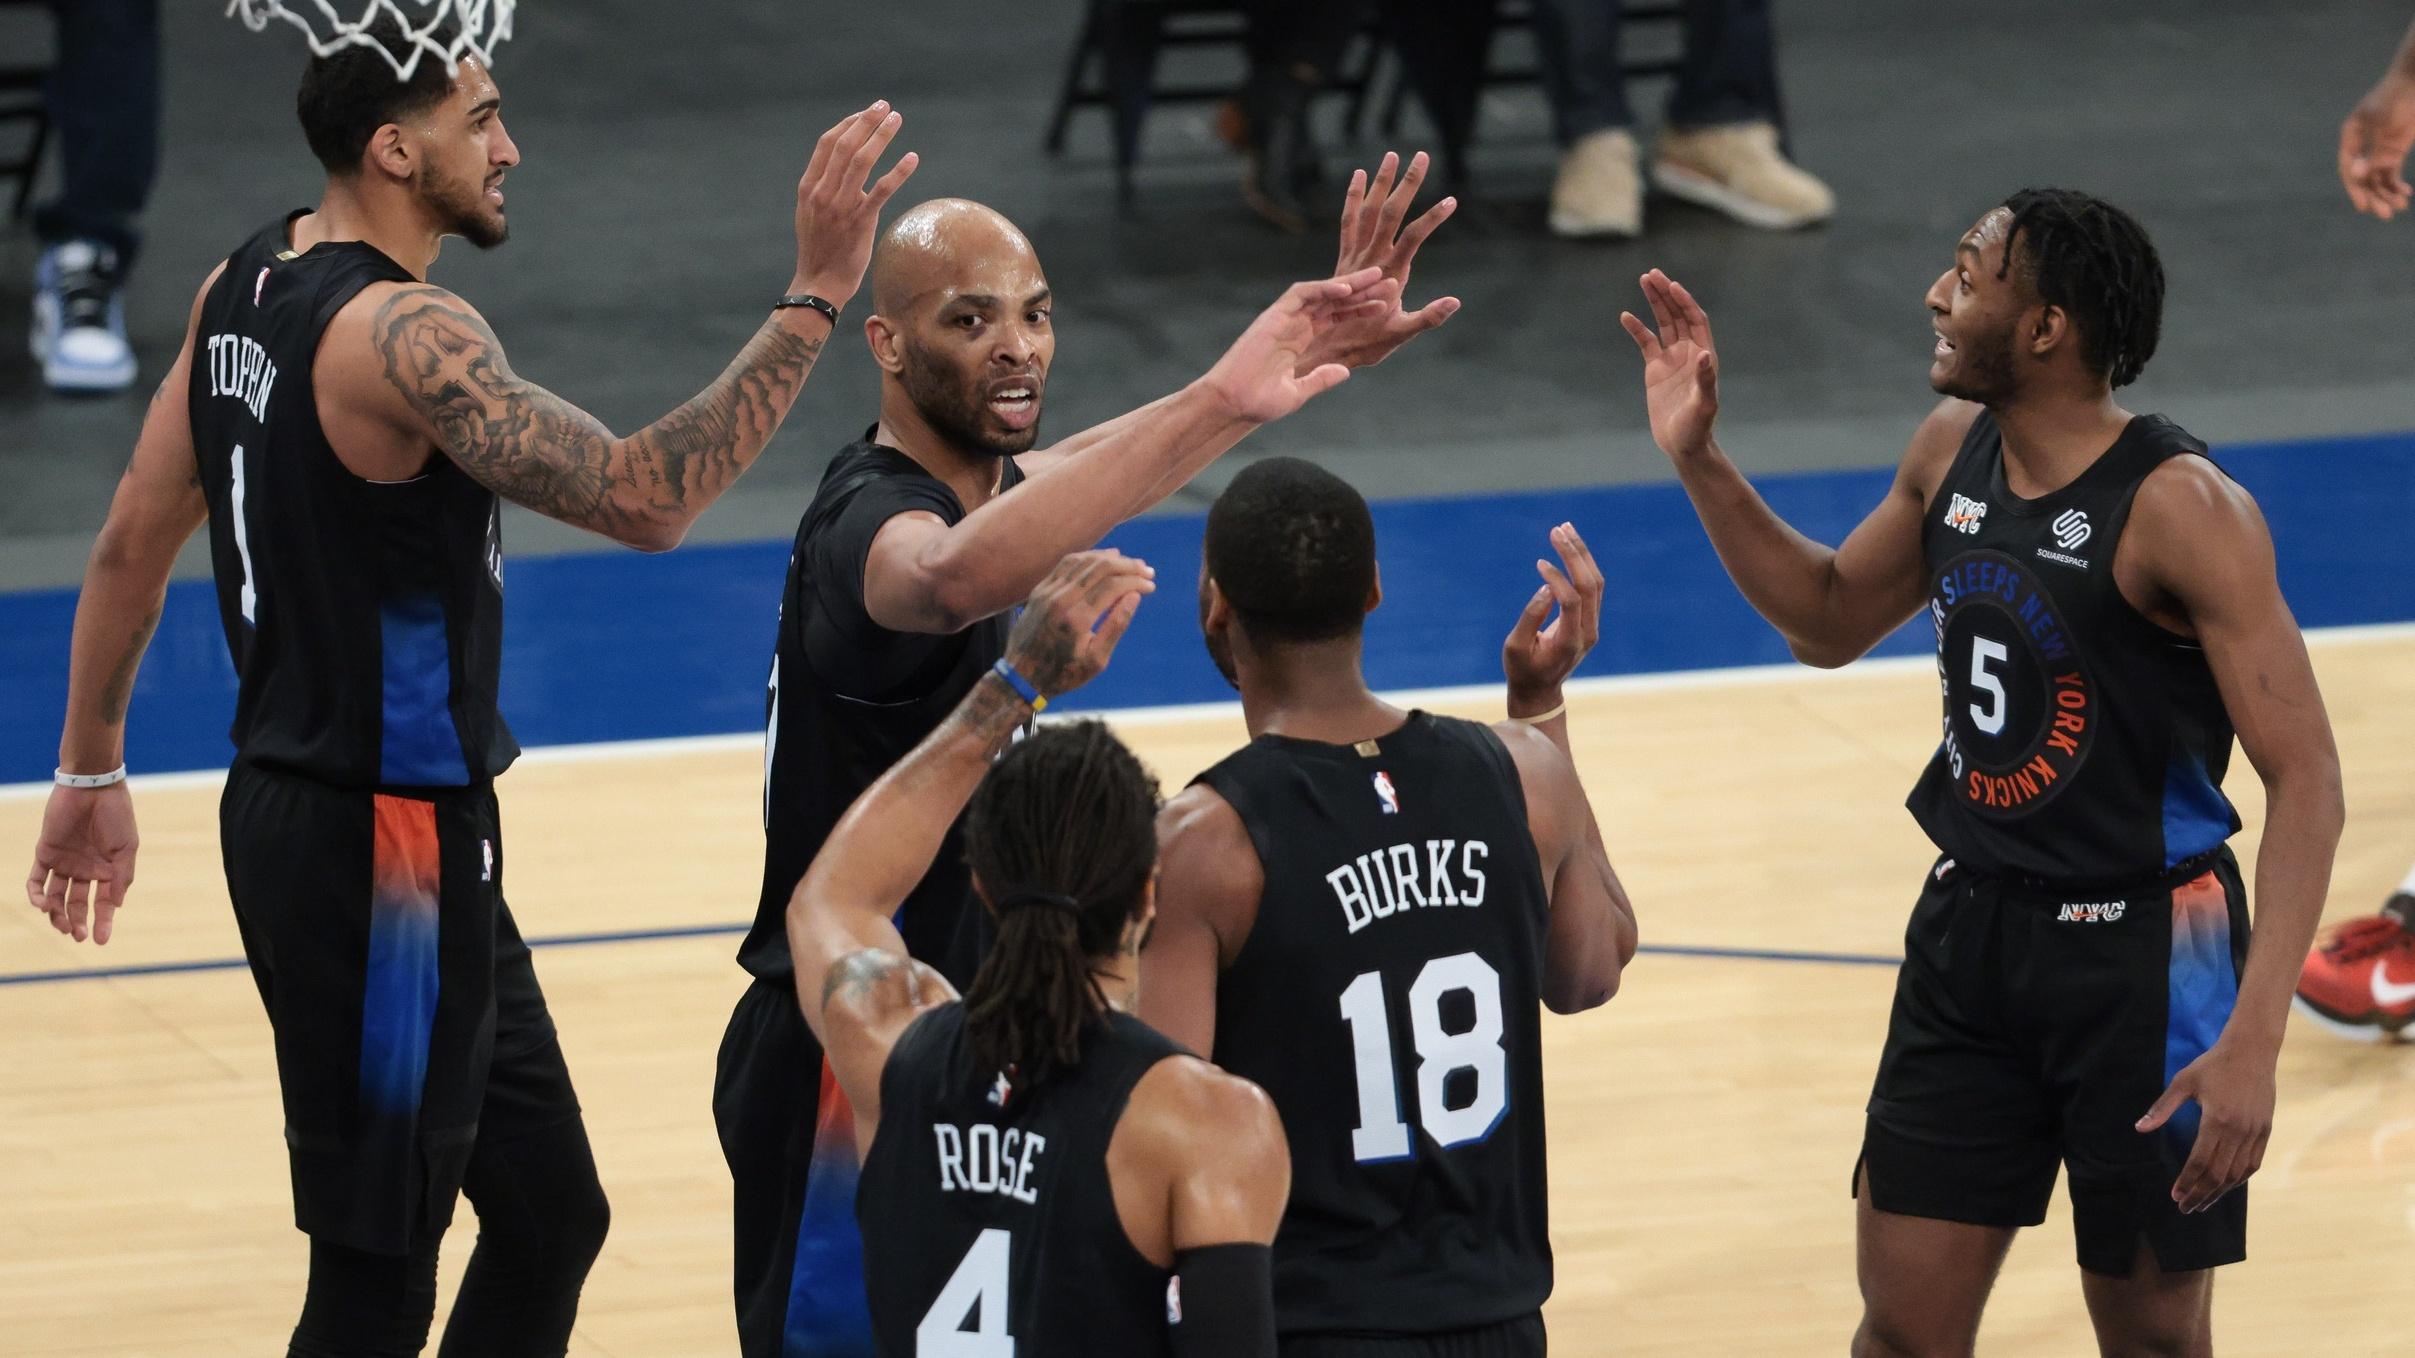 Apr 2, 2021; New York, New York, USA; New York Knicks center Taj Gibson (67) high fives with teammates after blocking a shot during the first half against the Dallas Mavericks at Madison Square Garden. / Vincent Carchietta-USA TODAY Sports